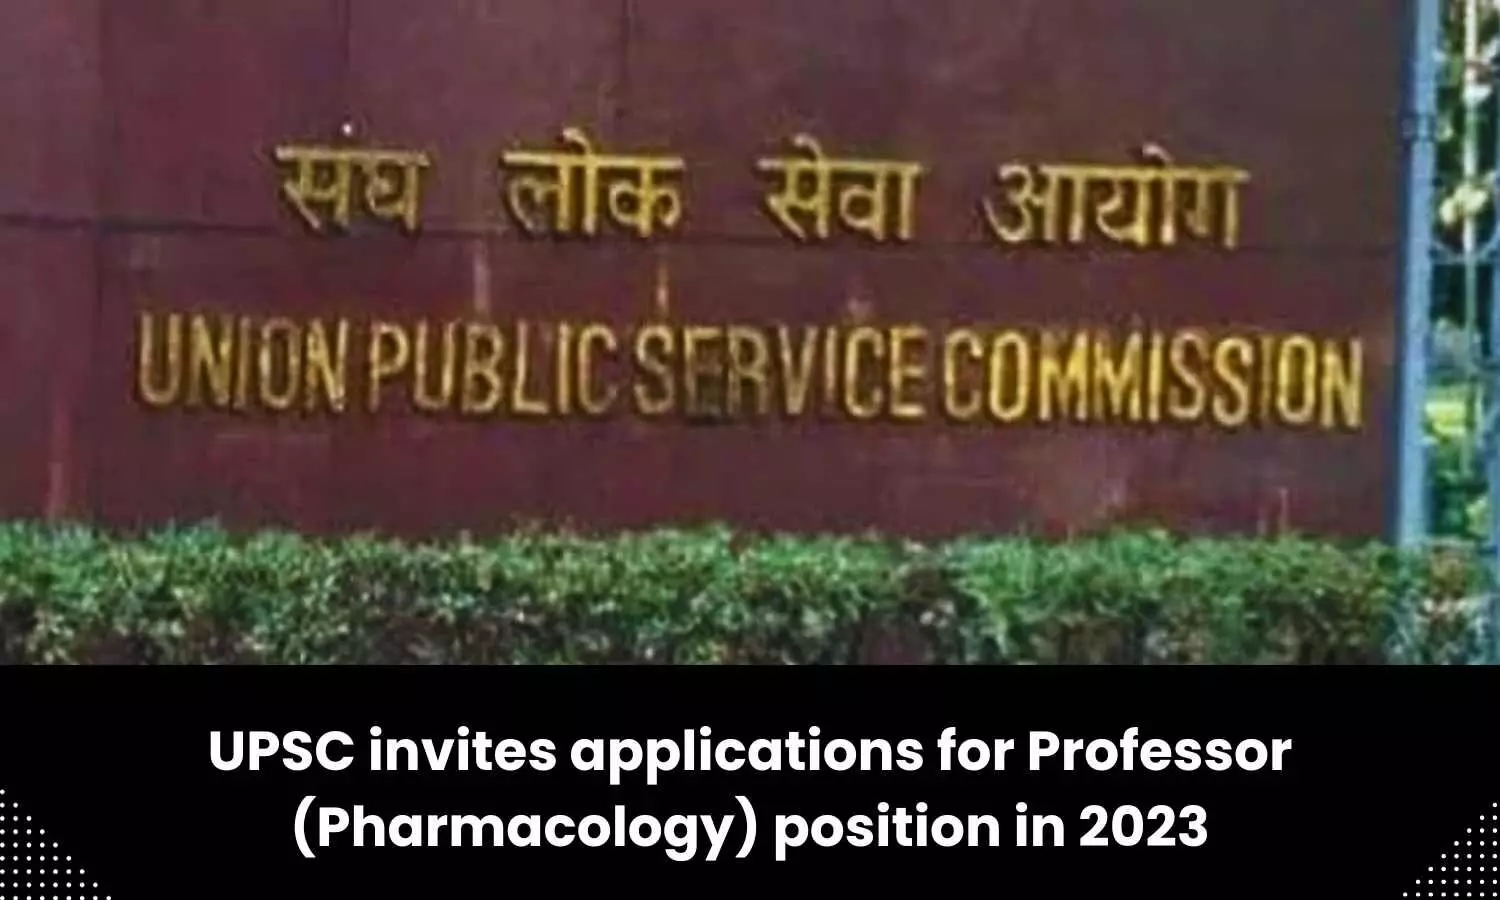 UPSC invites applications for Professor (Pharmacology) position